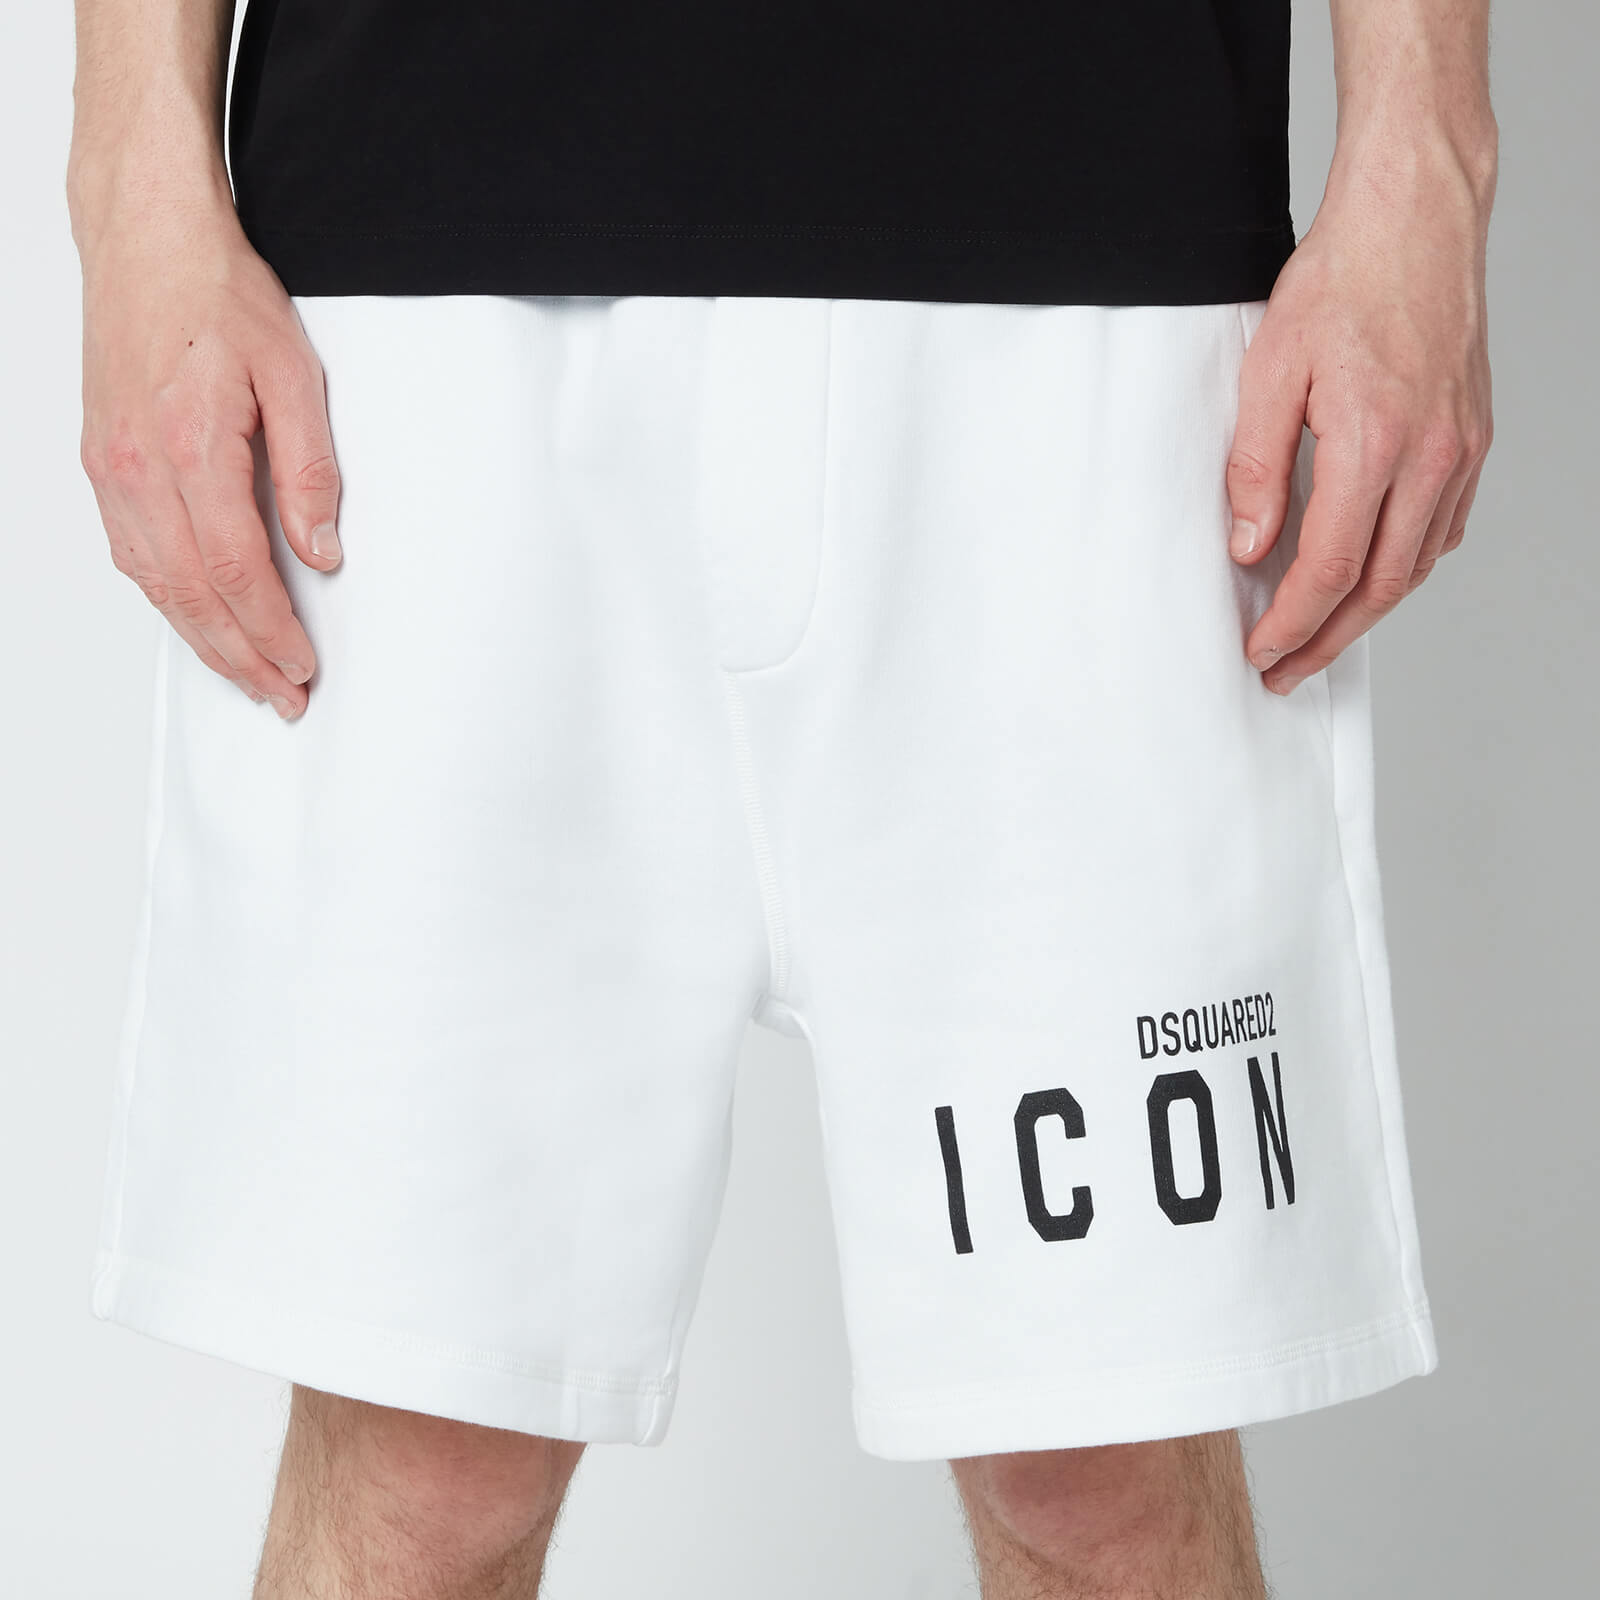 Dsquared2 Men's Relax Fit Icon Shorts - White - S